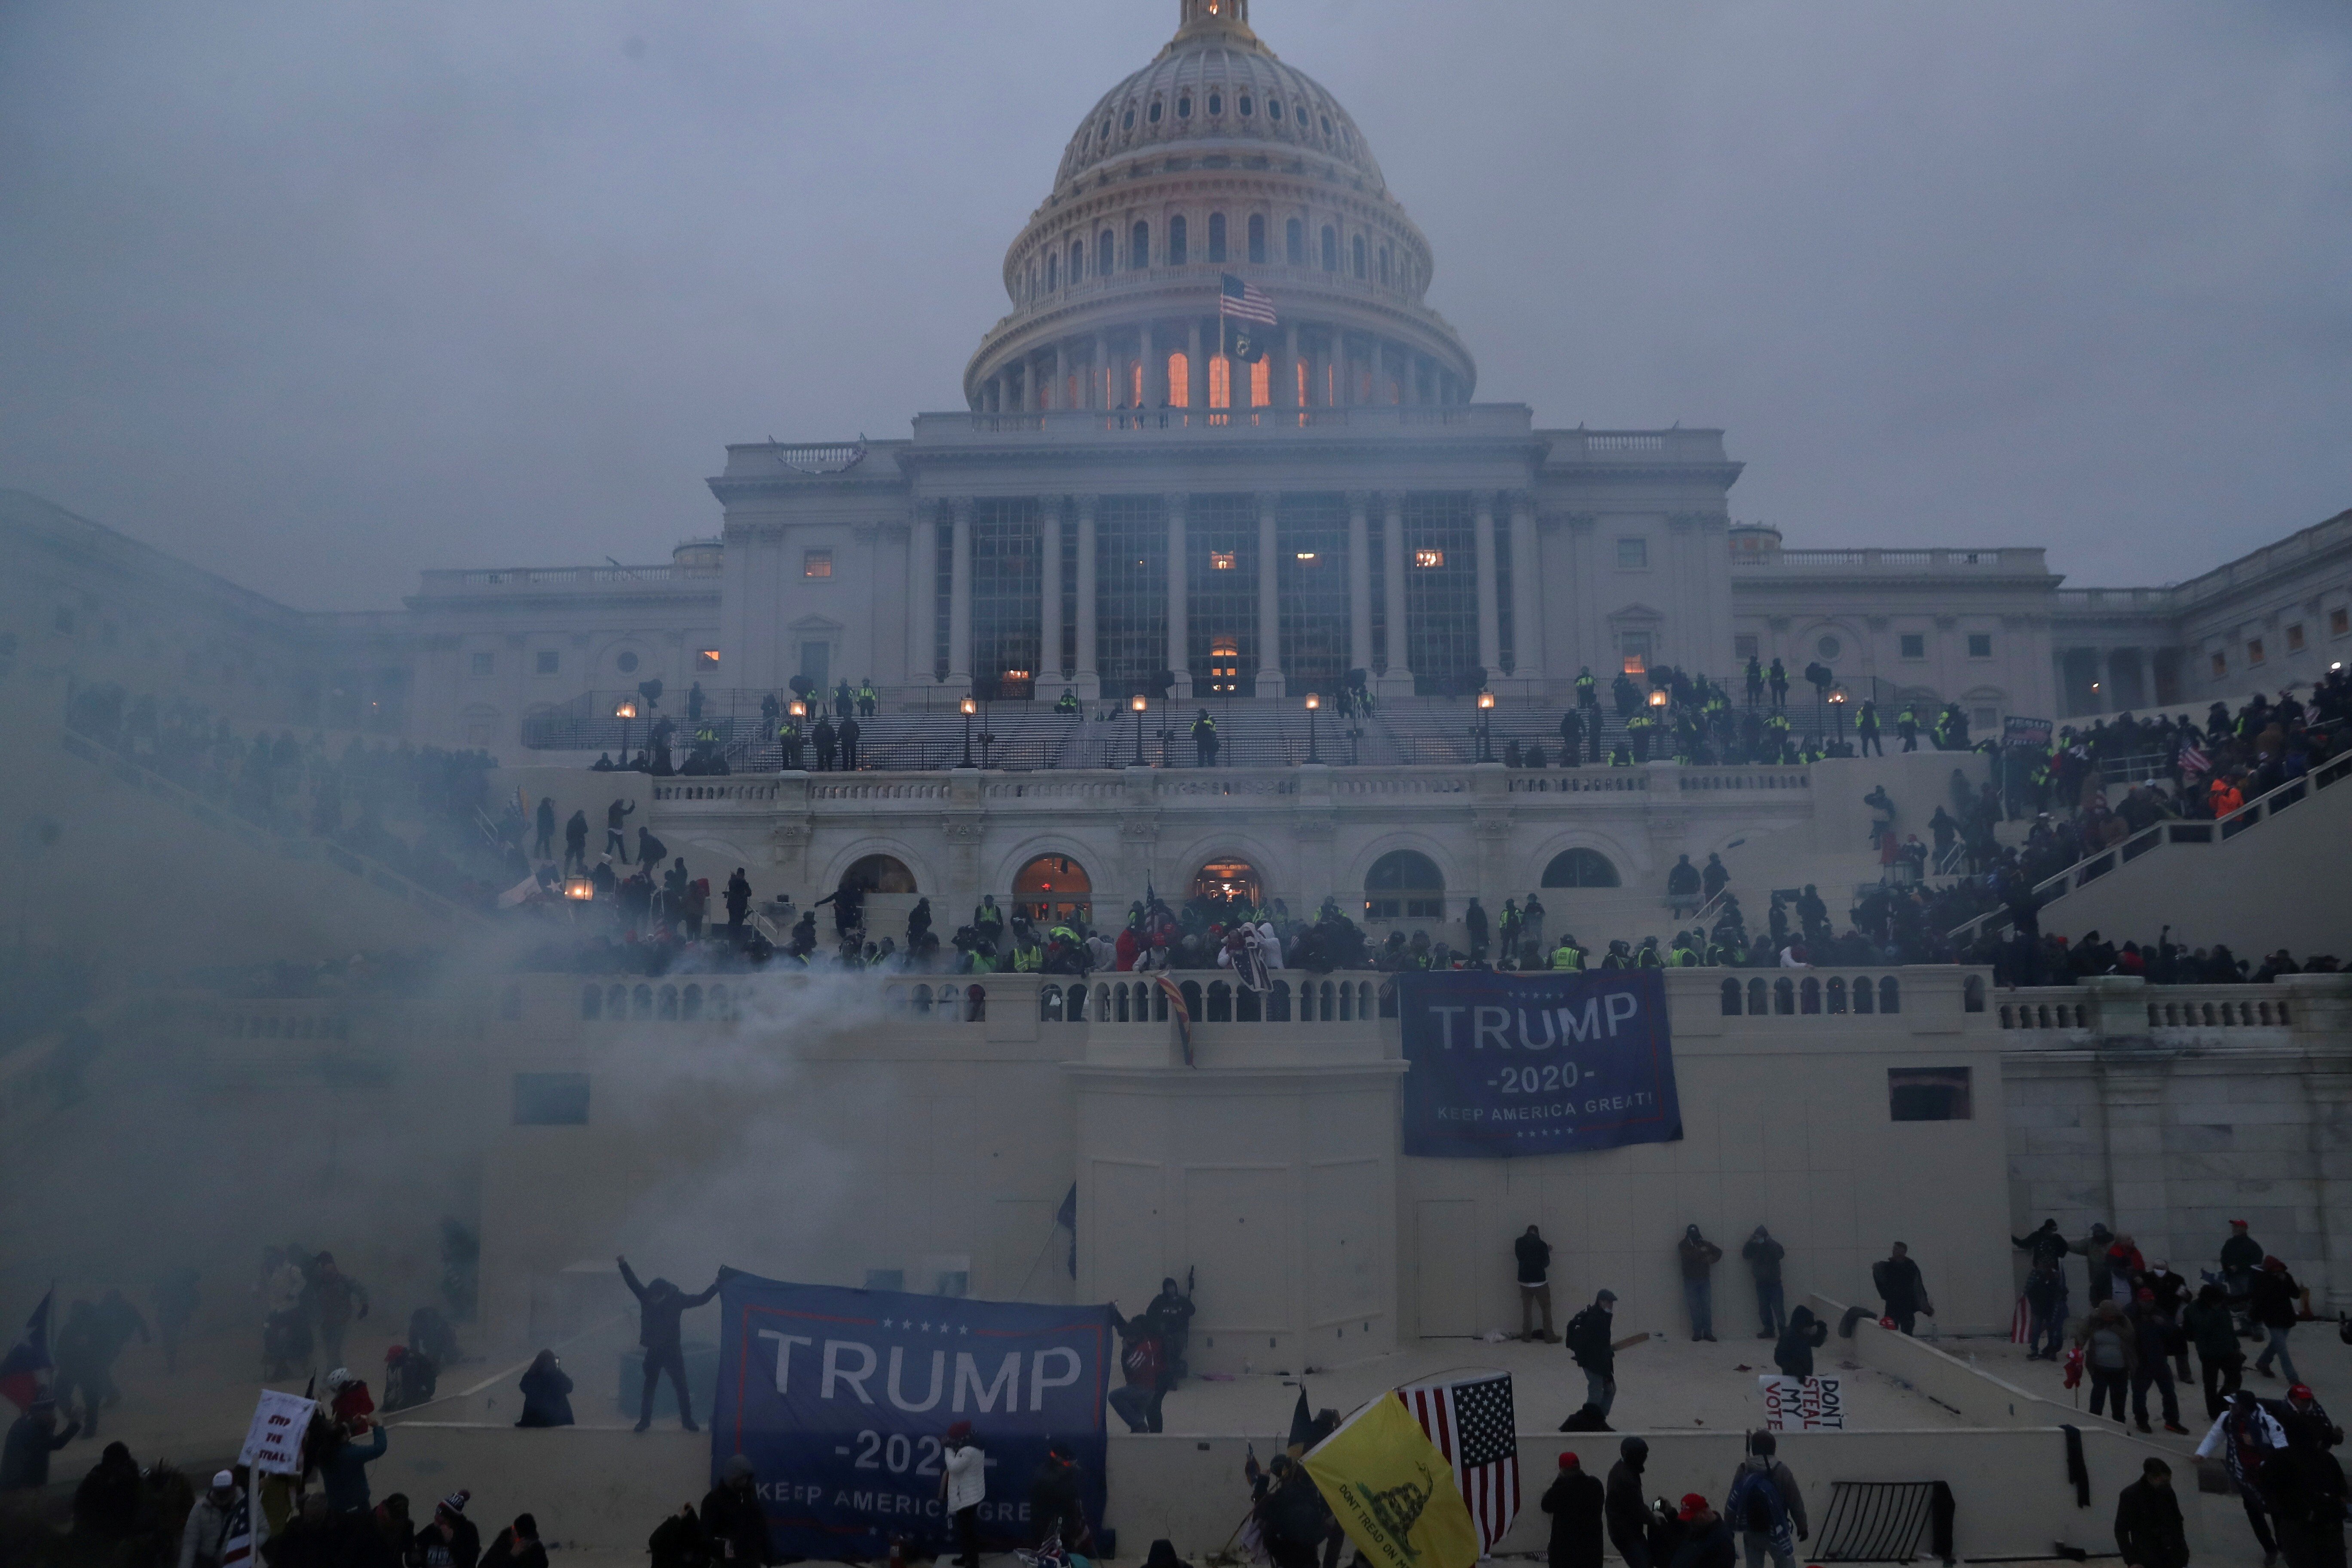 China has issued a safety warning to its citizens in the US after protests in Washington. Photo: Reuters